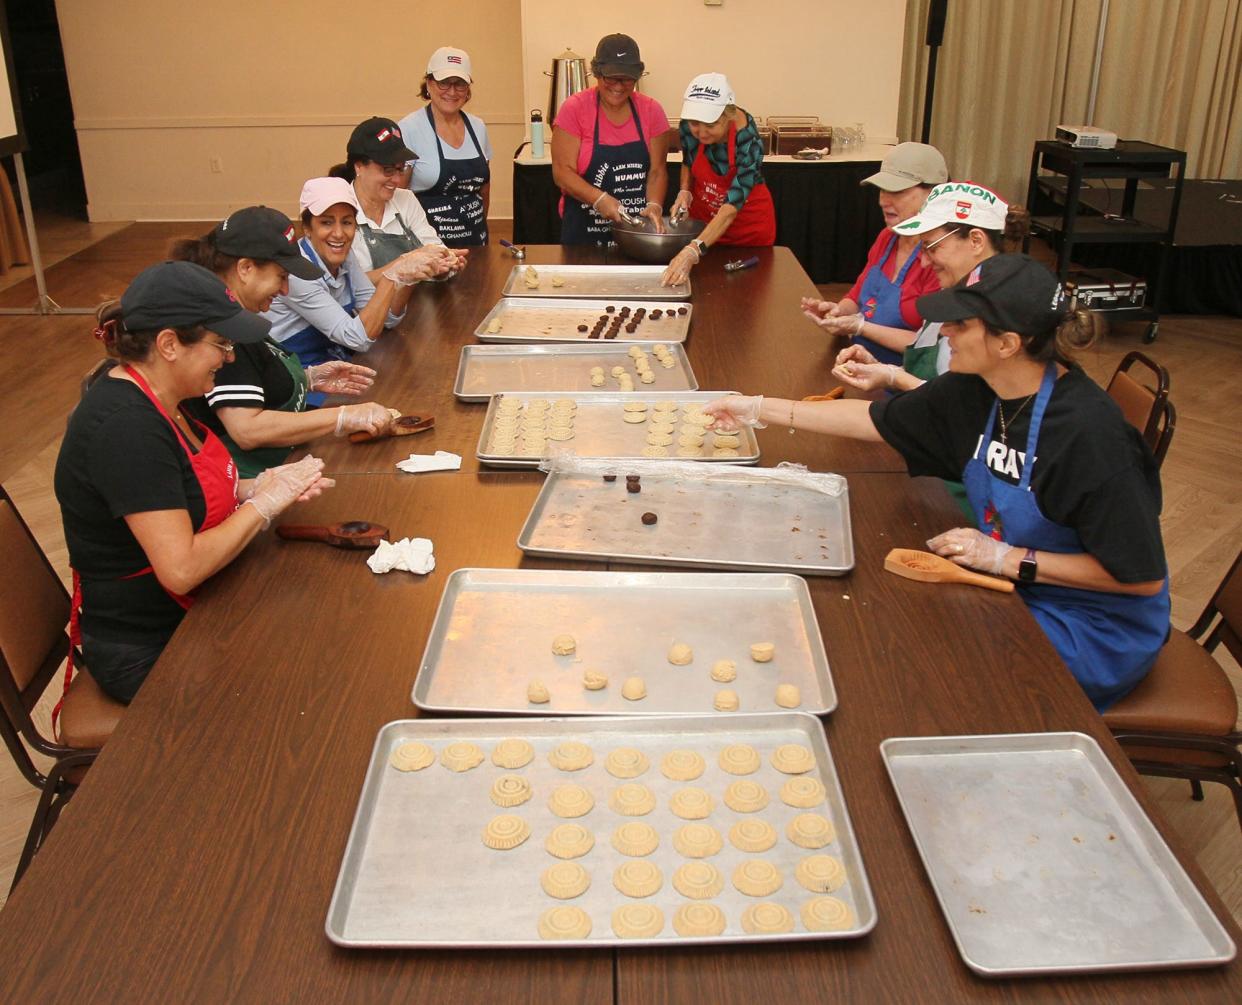 Members of Our Lady of the Cedars prepare ma'mool cookies at the church July 18. They are preparing for the church's annual Lebanese Festival Aug. 5-6.